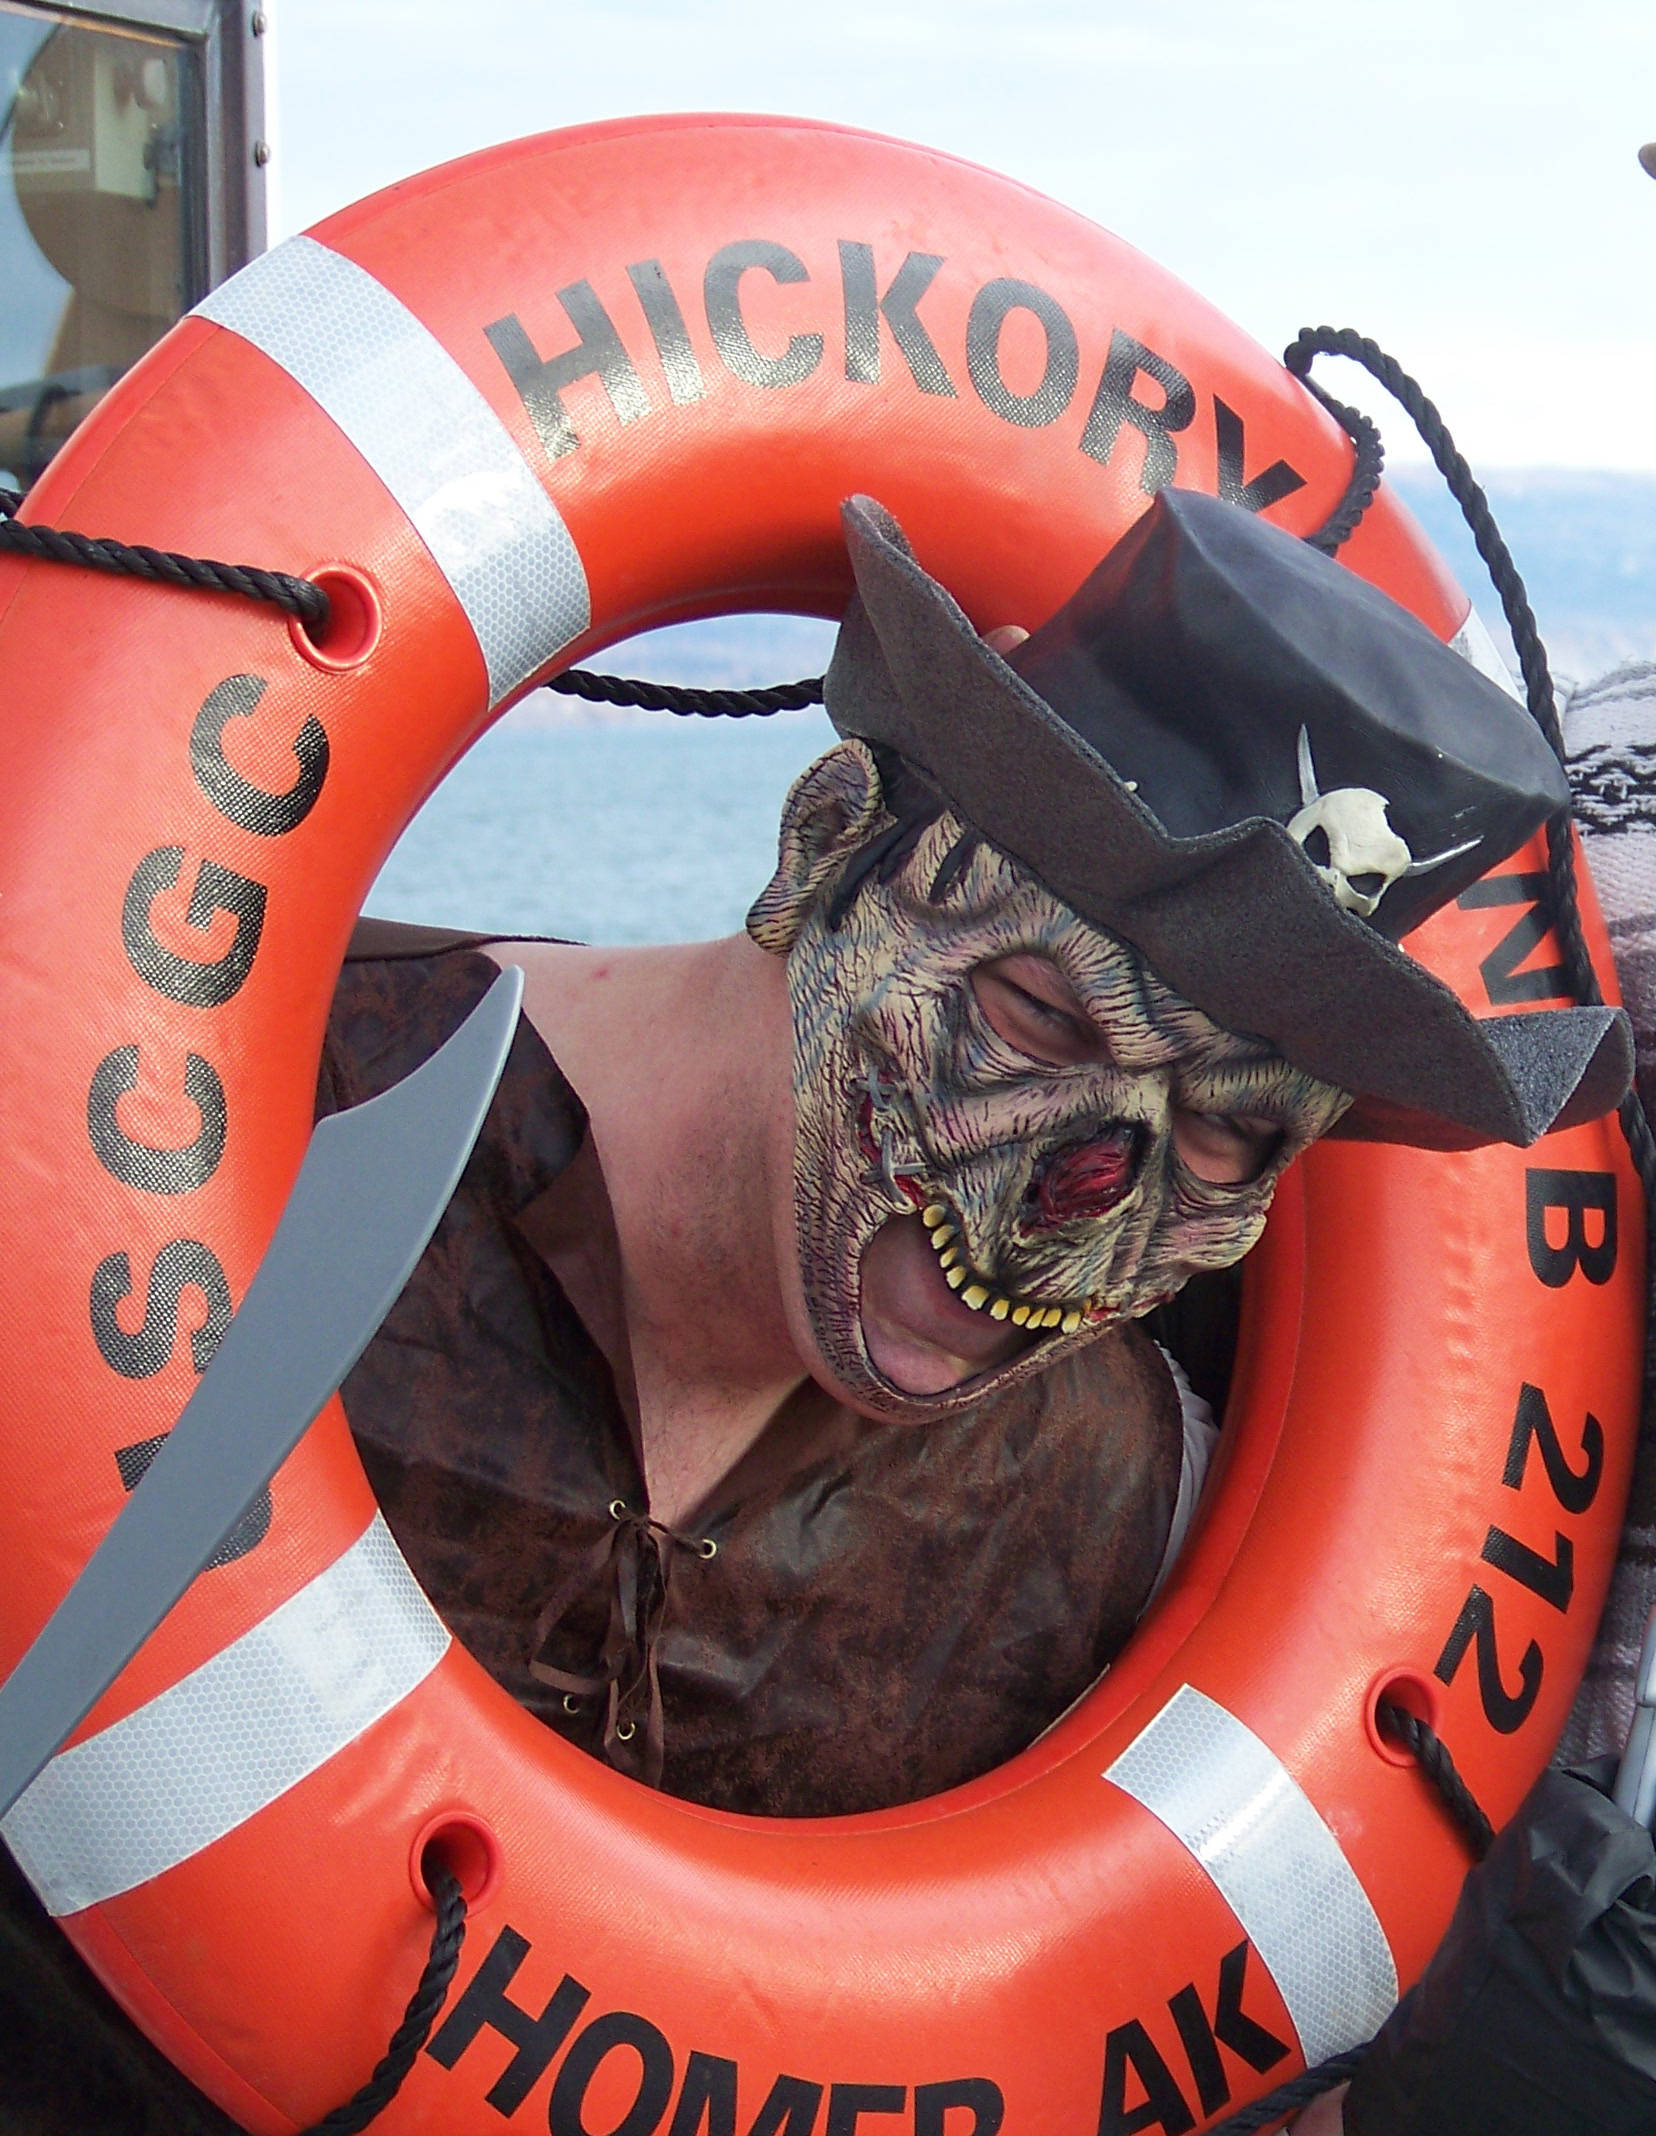 Ghoulies, goblins and monsters from the USCGC Hickory, including Colby Schlaht, left, and Jason Pratt, prepared for a hair-raising shipboard haunting in October 2012. Every year the crew of the Haunted Hickory decorates the ship for a night of good natured scary fun. (Homer News file photo)